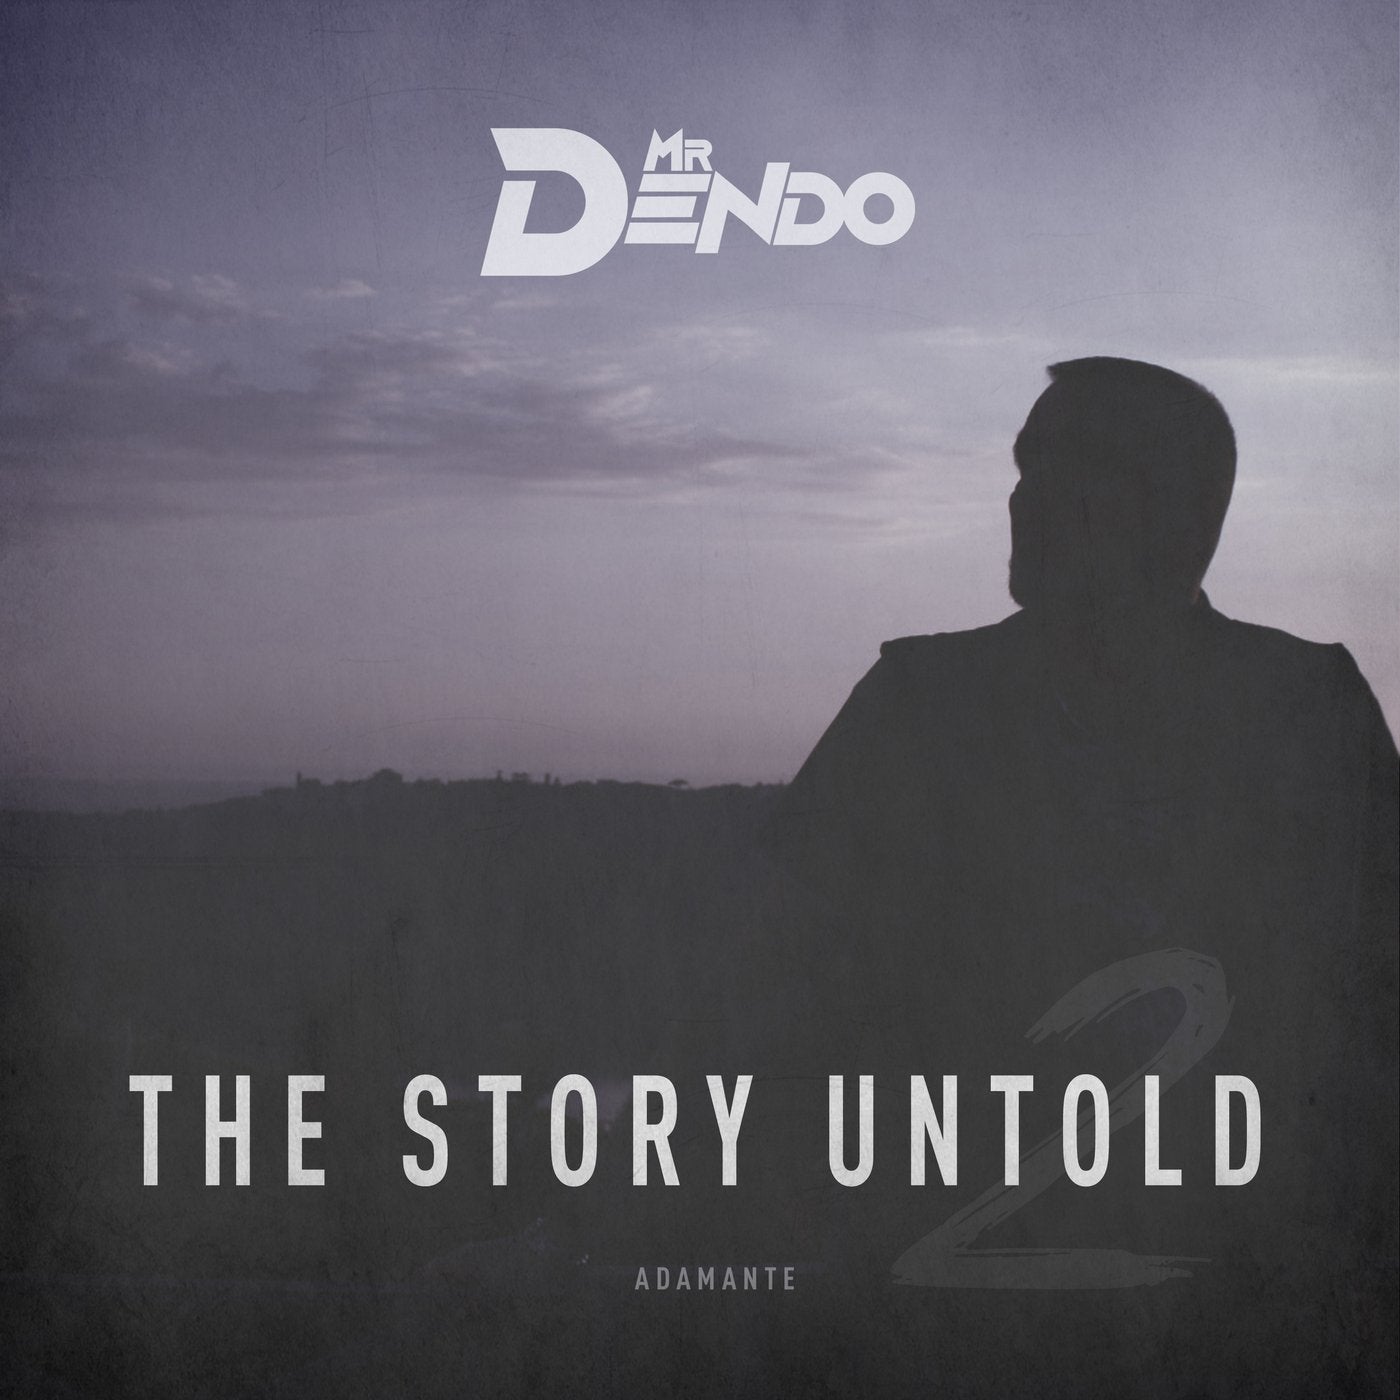 The Story Untold 2